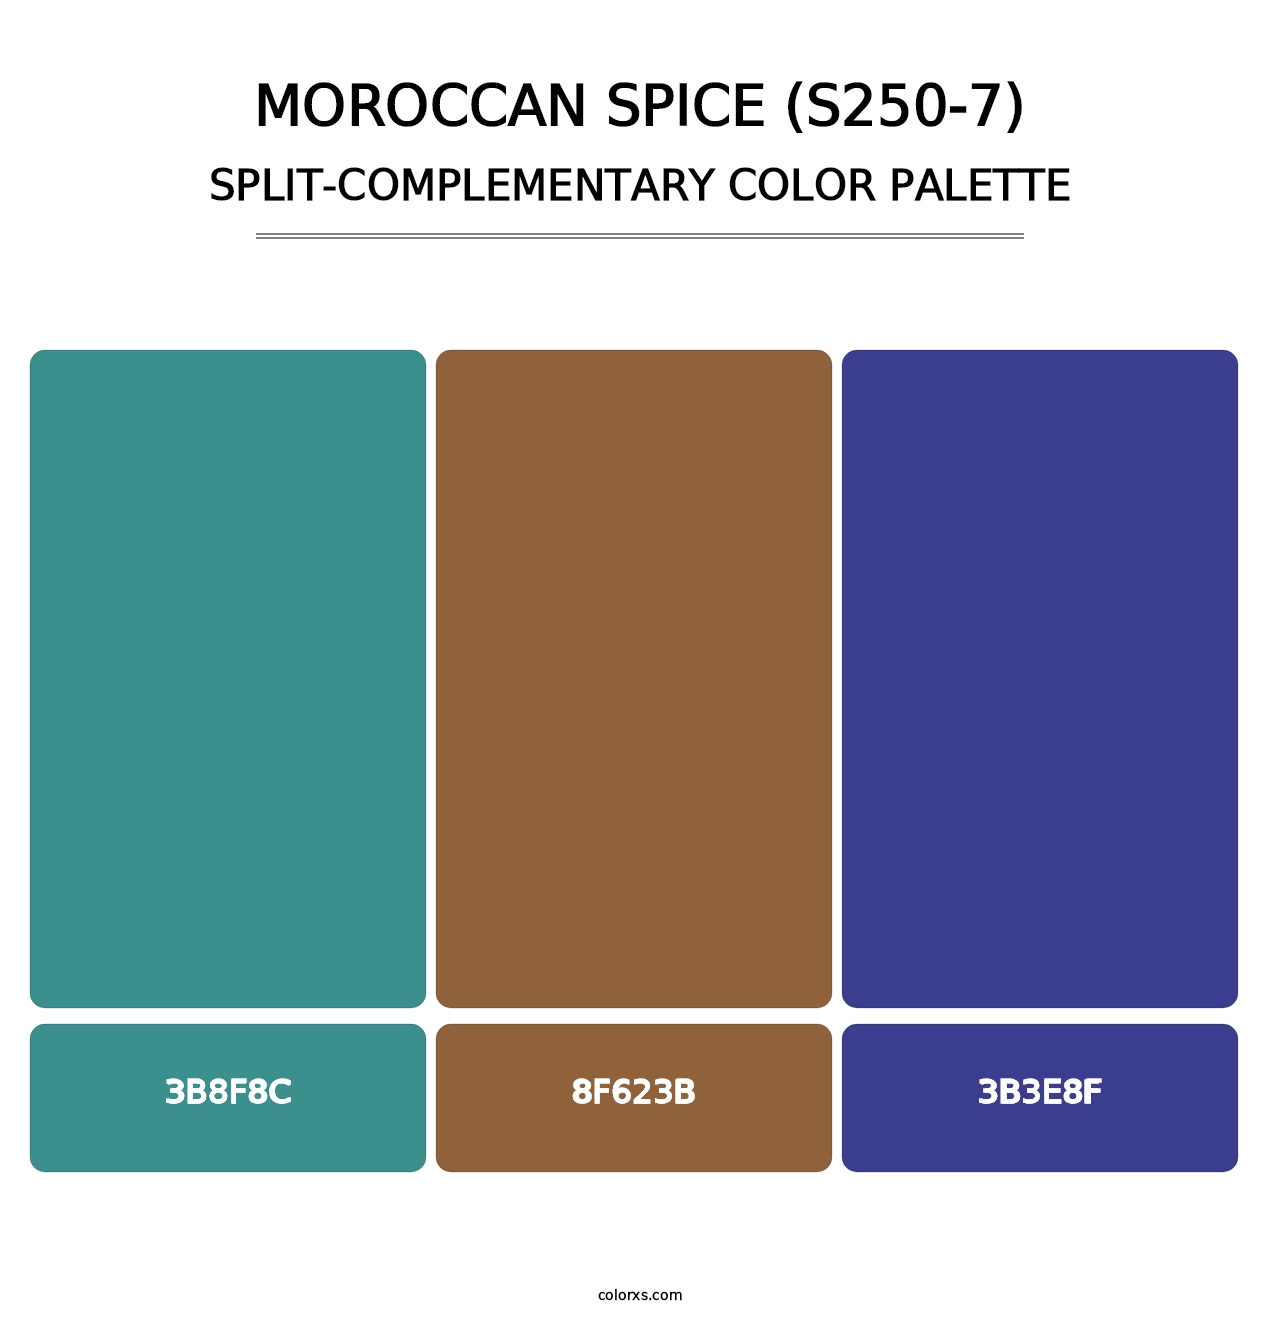 Moroccan Spice (S250-7) - Split-Complementary Color Palette